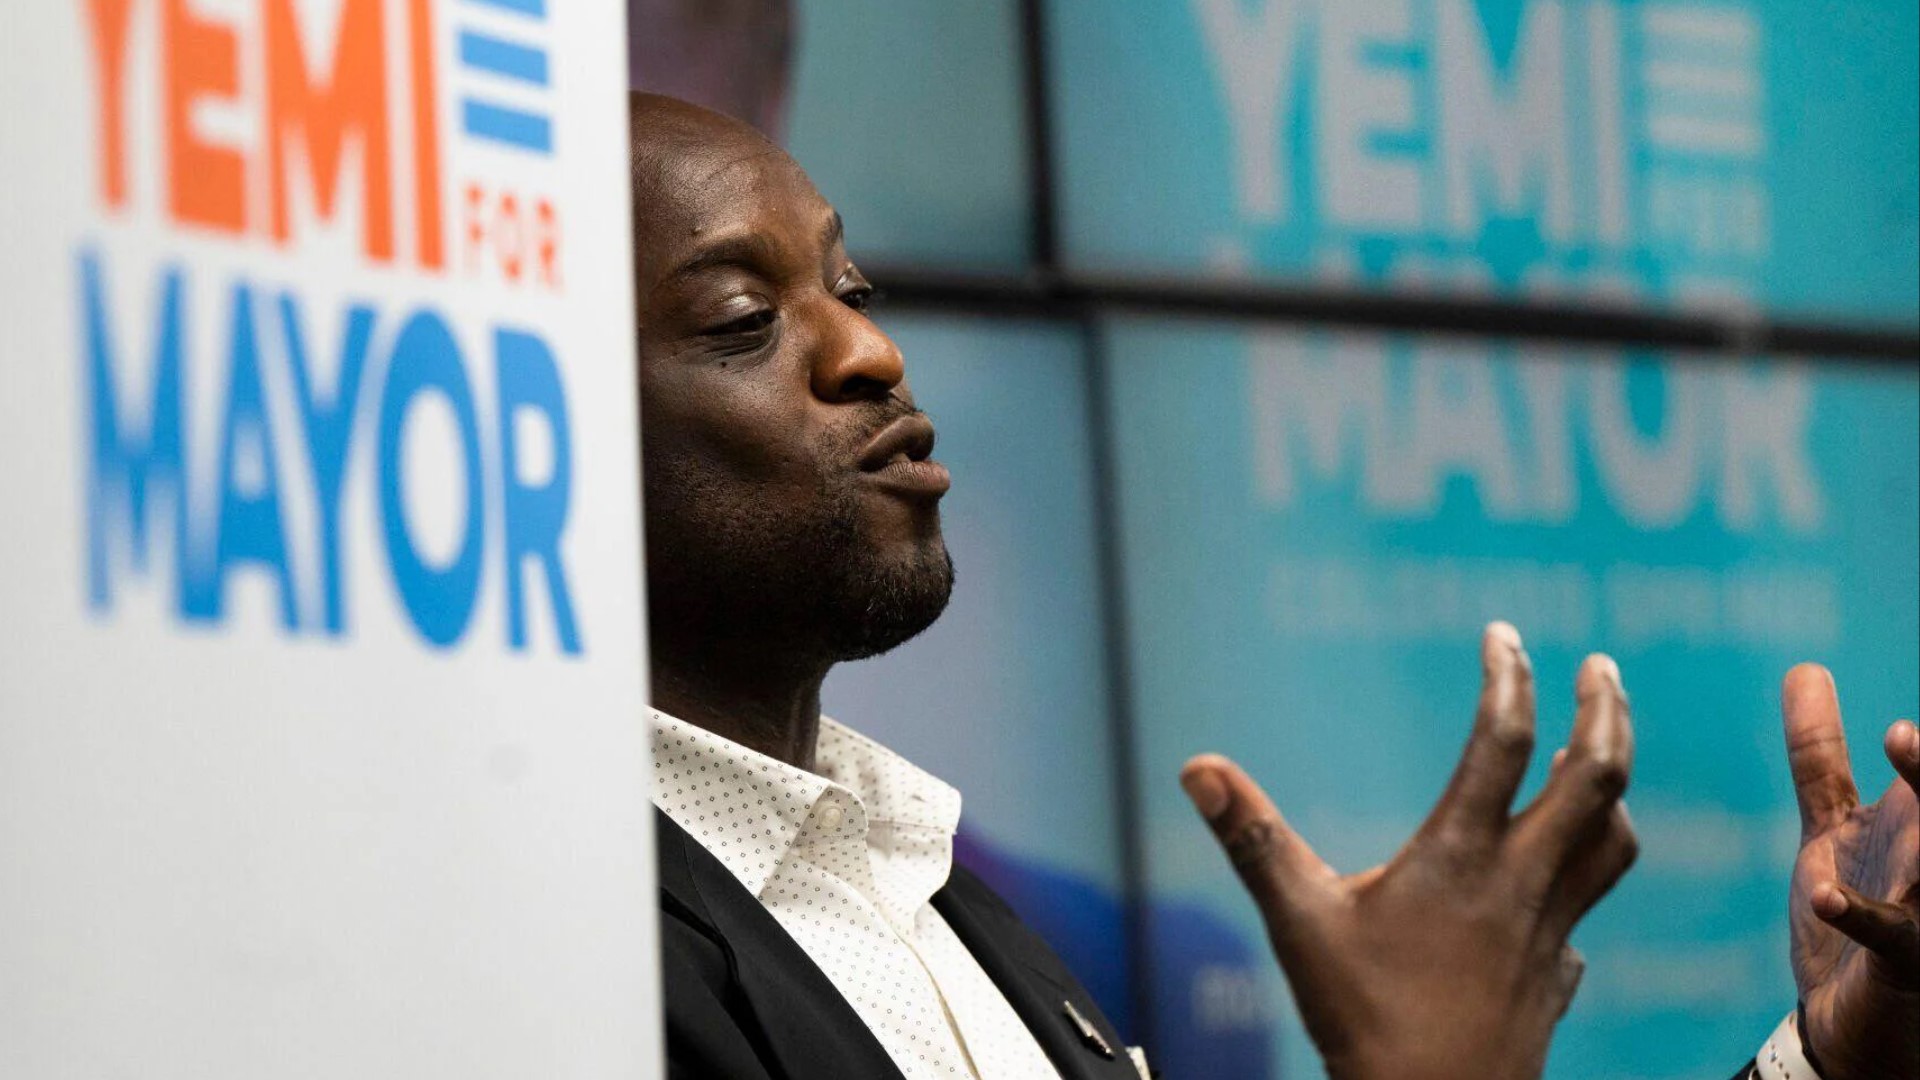 Colorado Springs has elected its first Black mayor. Yemi Mobolade is a West African immigrant backed by the Democratic party in the nonpartisan election.